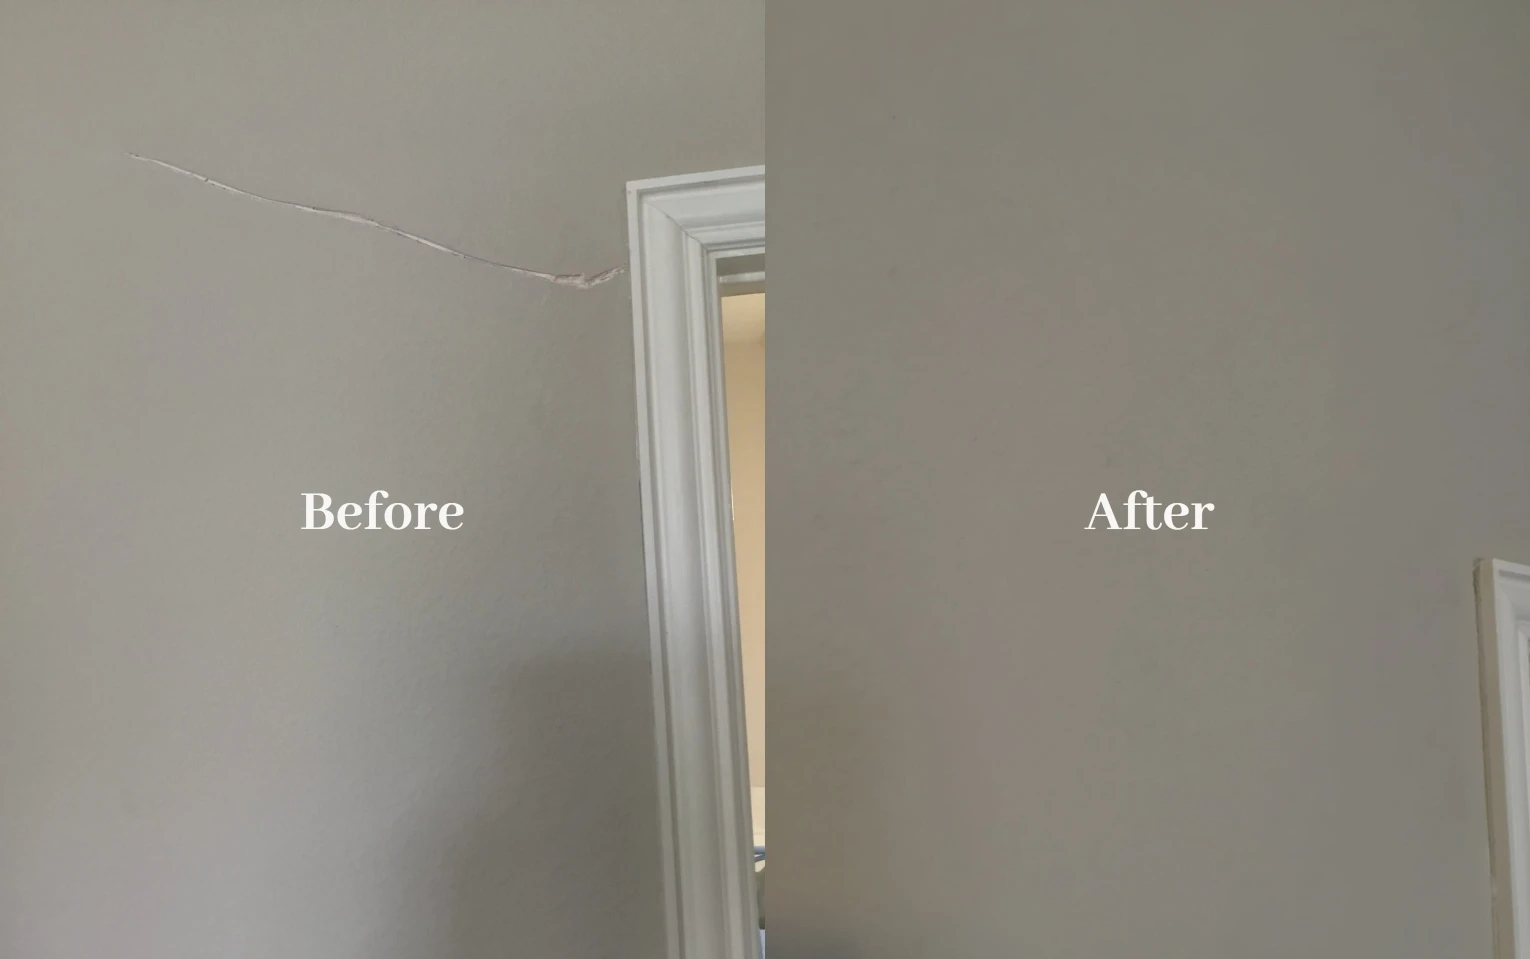 A wall in a home with a crack in the wall near a door frame before and after the cracked drywall has been fixed with Mr. Handyman’s services for Sheetrock repair in Denton, TX.